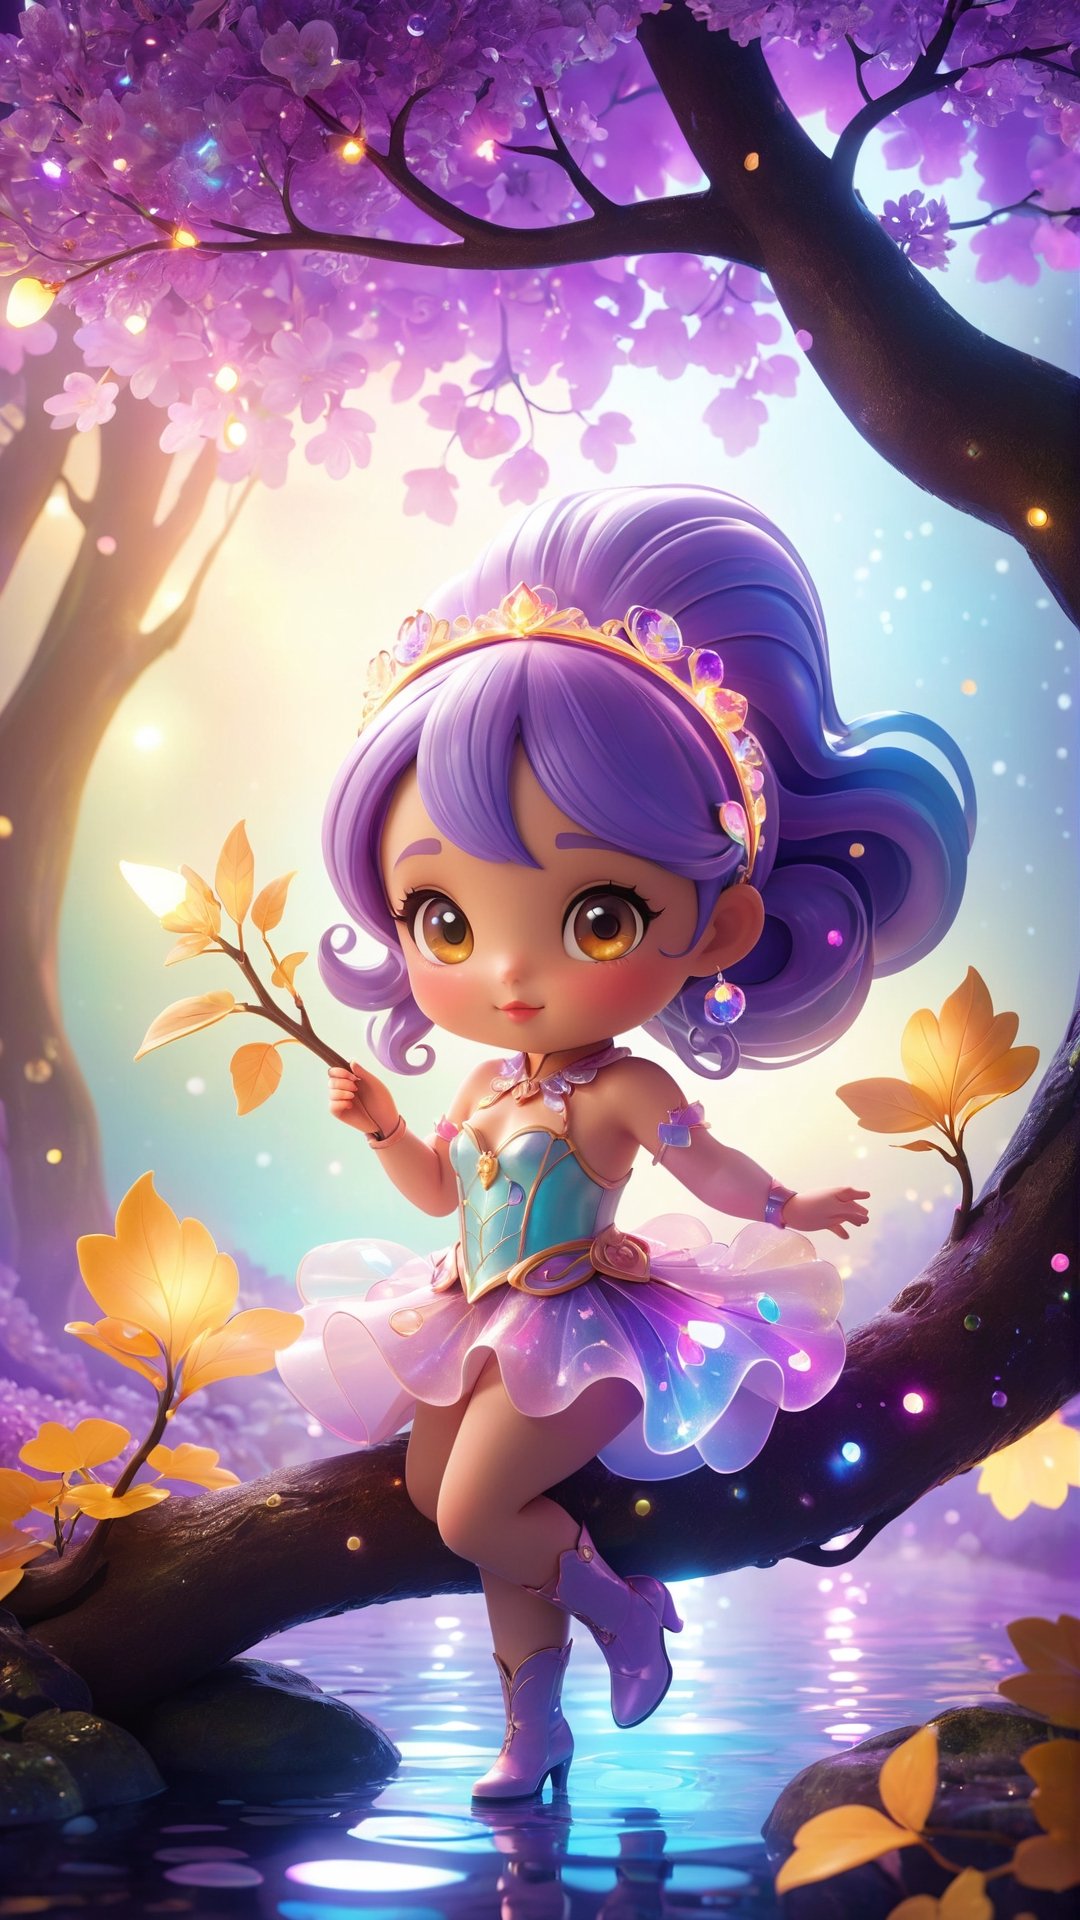 "Chibi" mascots include a cute girl cute 3d cartoon fashionable rainbow Art Nouveau fairytale poster, pin-up cuteness overload night fairytale fantasy pastel Neon Light (lighting/lasers/LEDs/Light Projection/fairy lights) cinematic, 32k, cgsociety, digital art, macrorealism, surreal, storybook illustration, expressive glowing eyes a close up luminous vivid dreamy romantic girl portrait, steampunk, unmaterial, ethereal, dreamlike holding a tree lilac branch, dynamic expressive pose detailed luminous scales, detailed skin texture, transparent body, shadow play, sparks, glittering leaves glowing contoured Burton Craola, Ryden, Ceccoli, octane render dynamic intricated pose, sleek, modern., fairytale, fantasy, by Andy Kehoe, artistic water drops on petals, detailed petals texture, dynamic pose, tender, soft pastel colors, octane render, beautiful, tiny detailed